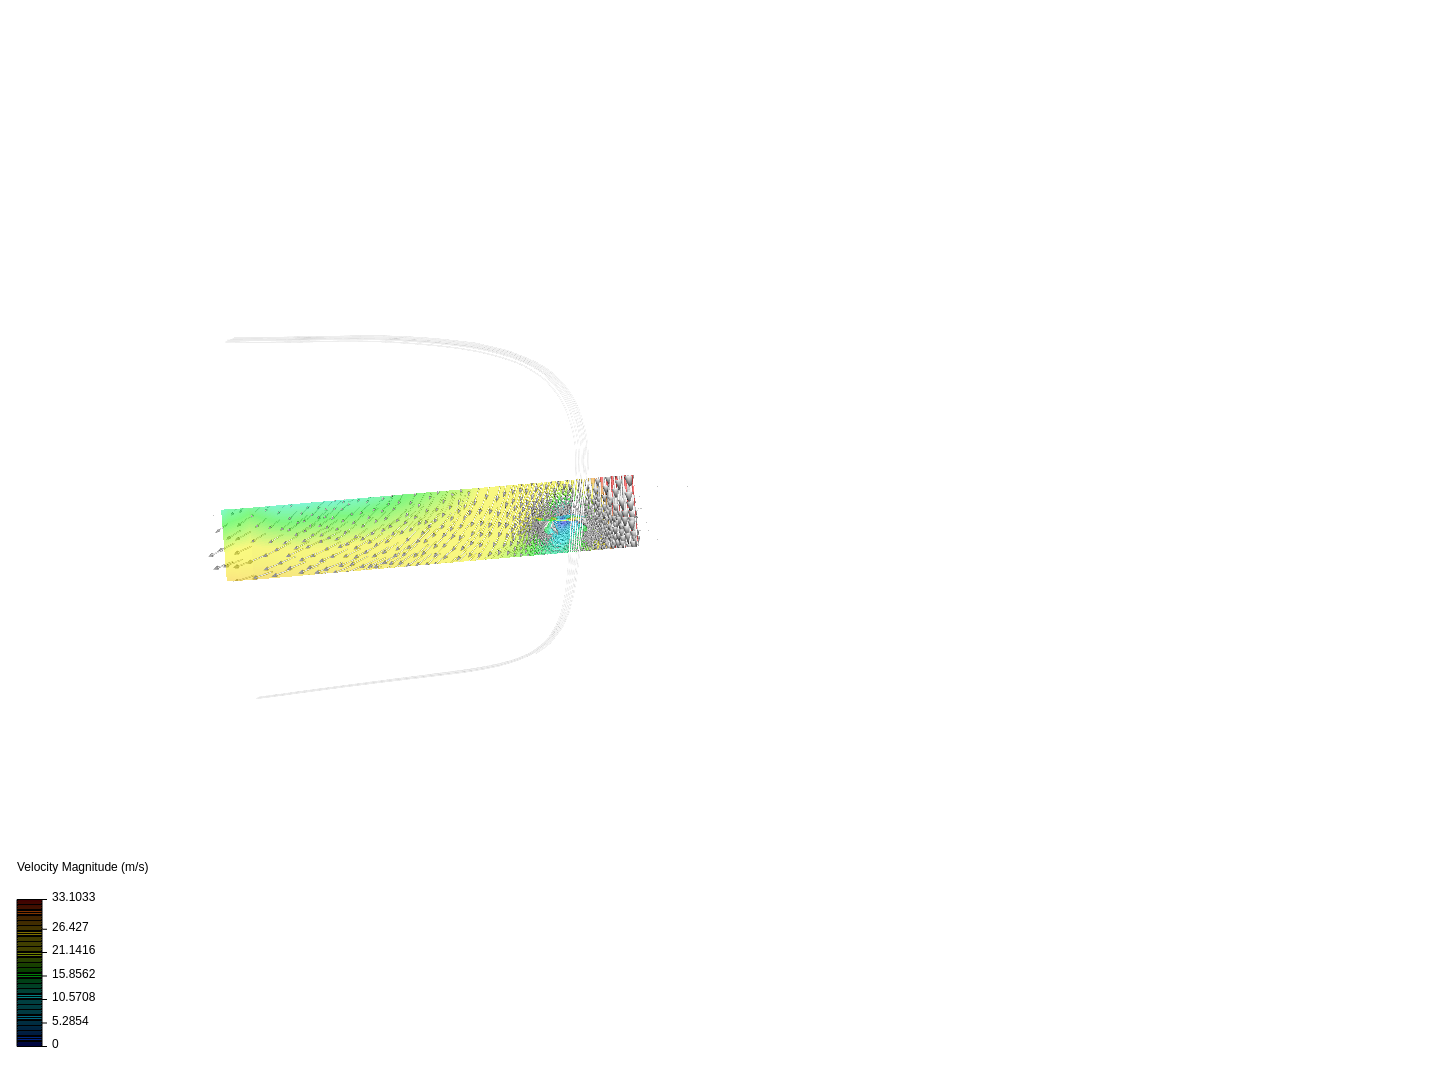 Concept Jet CFD image